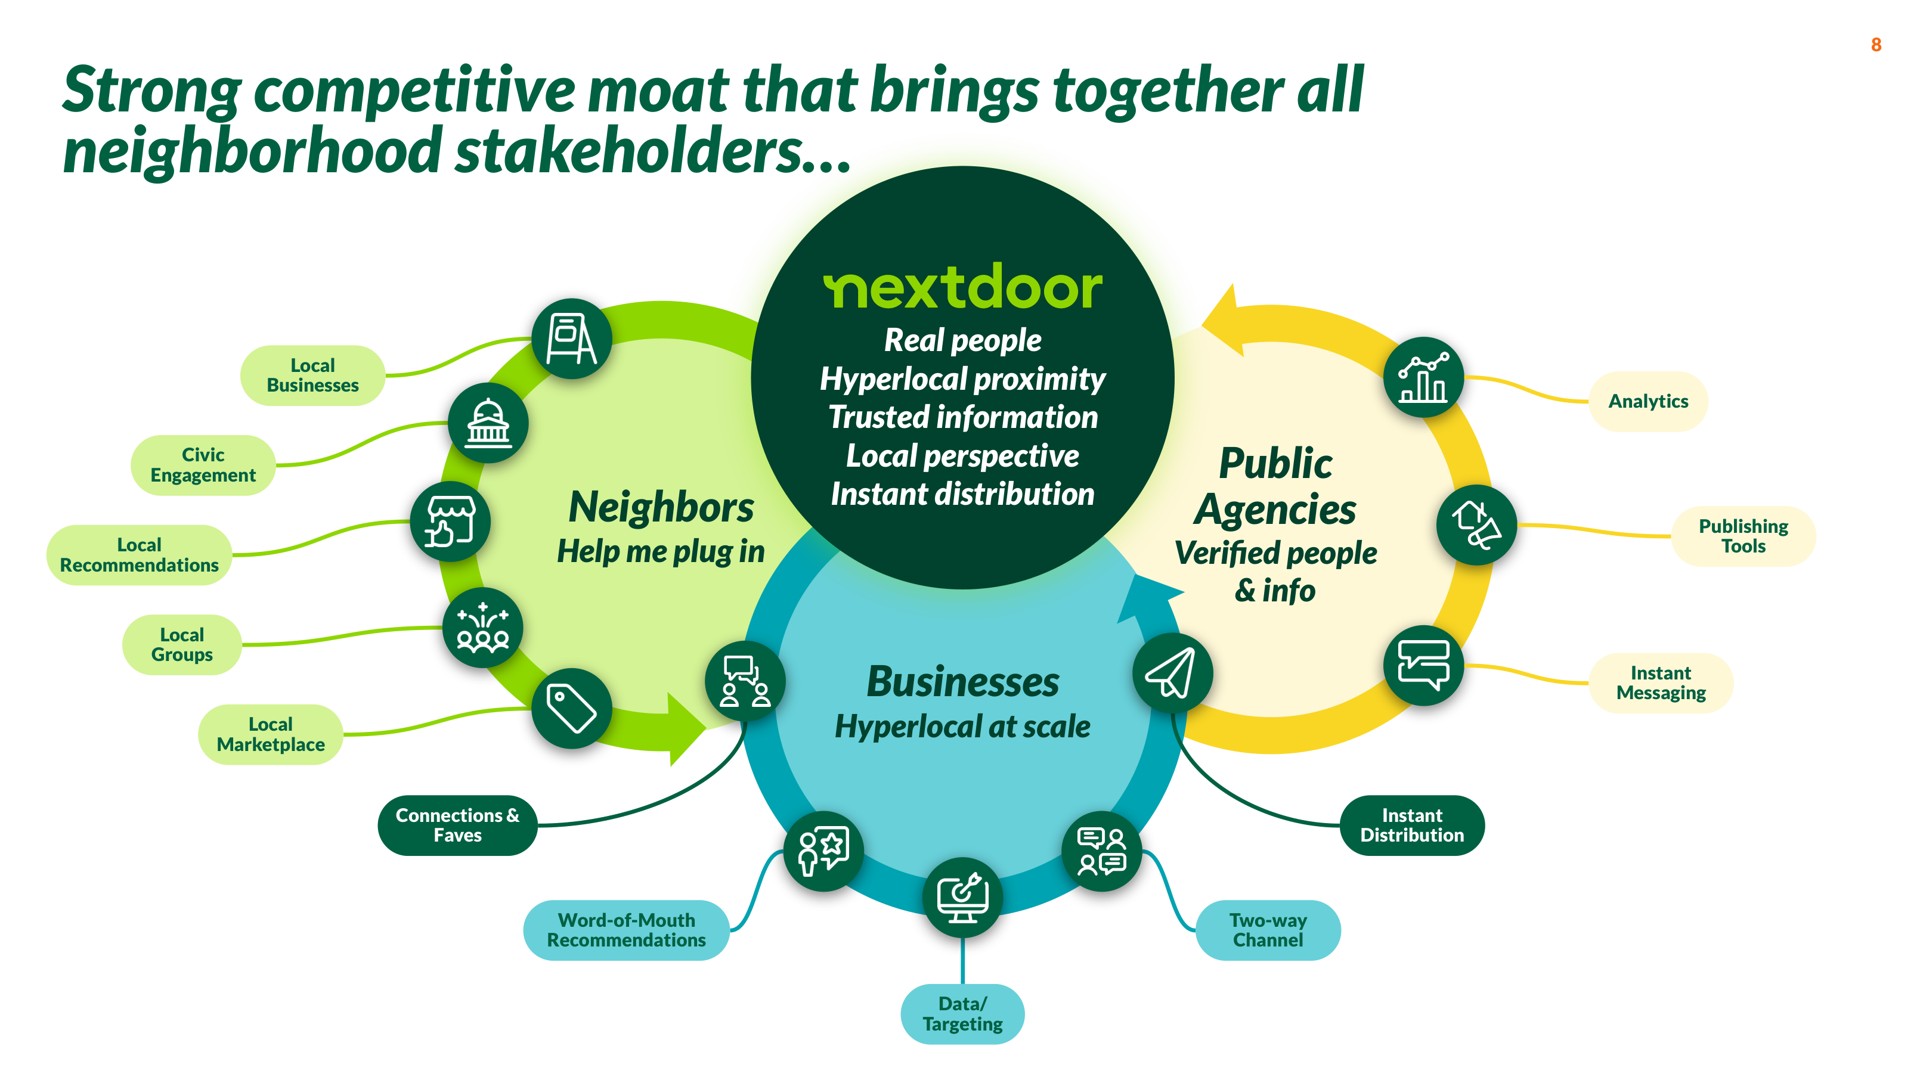 strong competitive moat that brings together all neighborhood stakeholders | Nextdoor